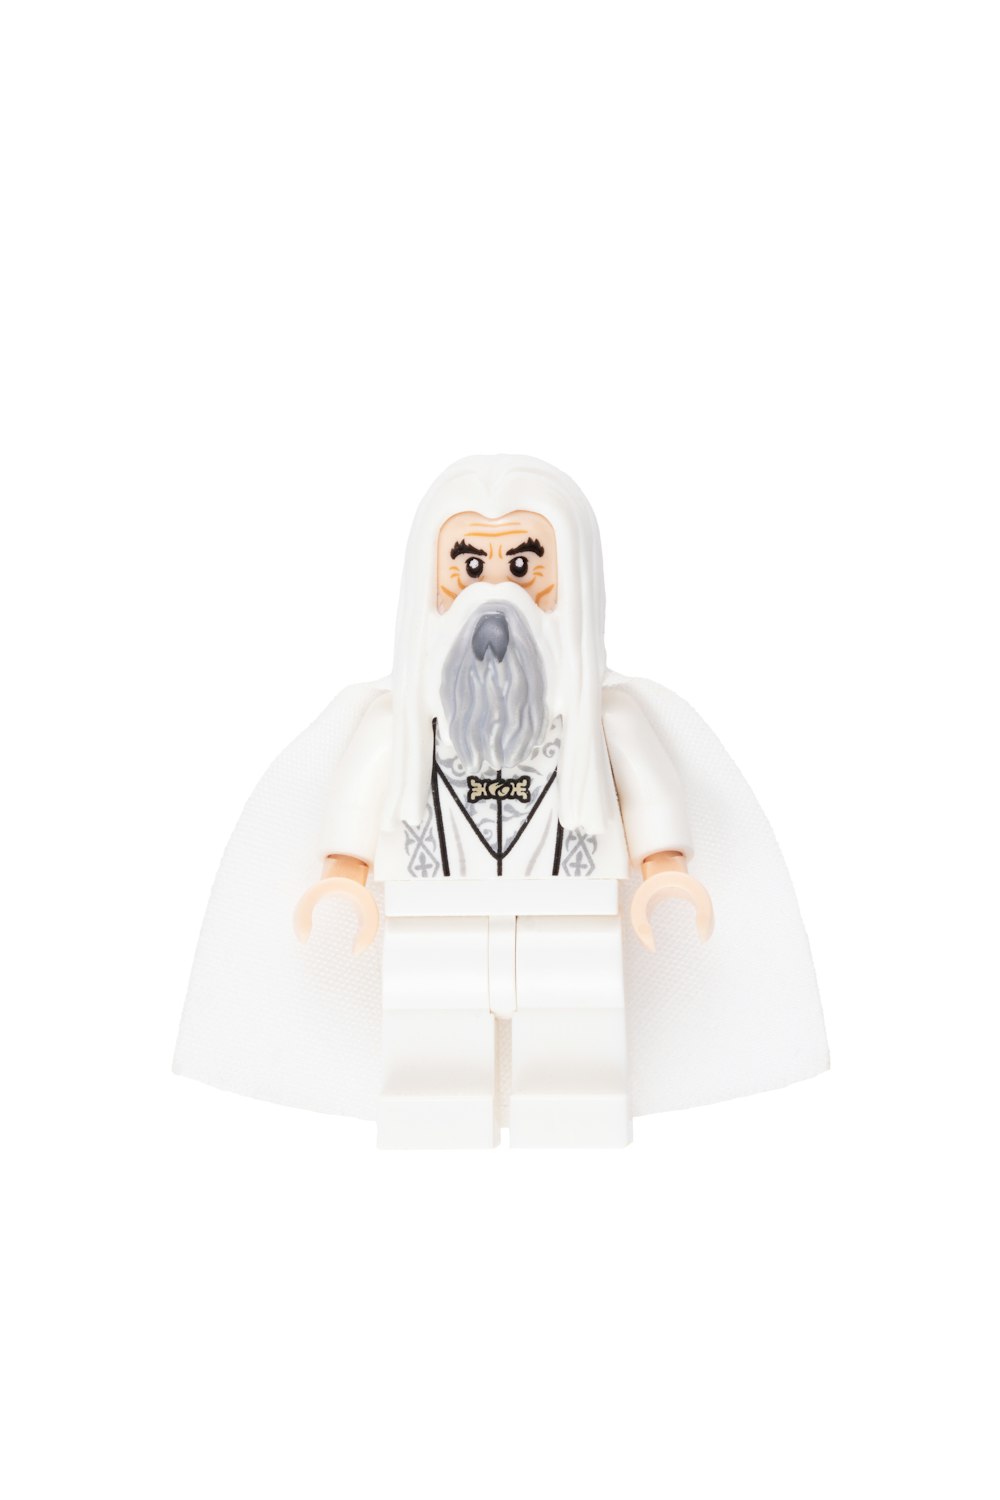 a white lego figure with a beard and mustache